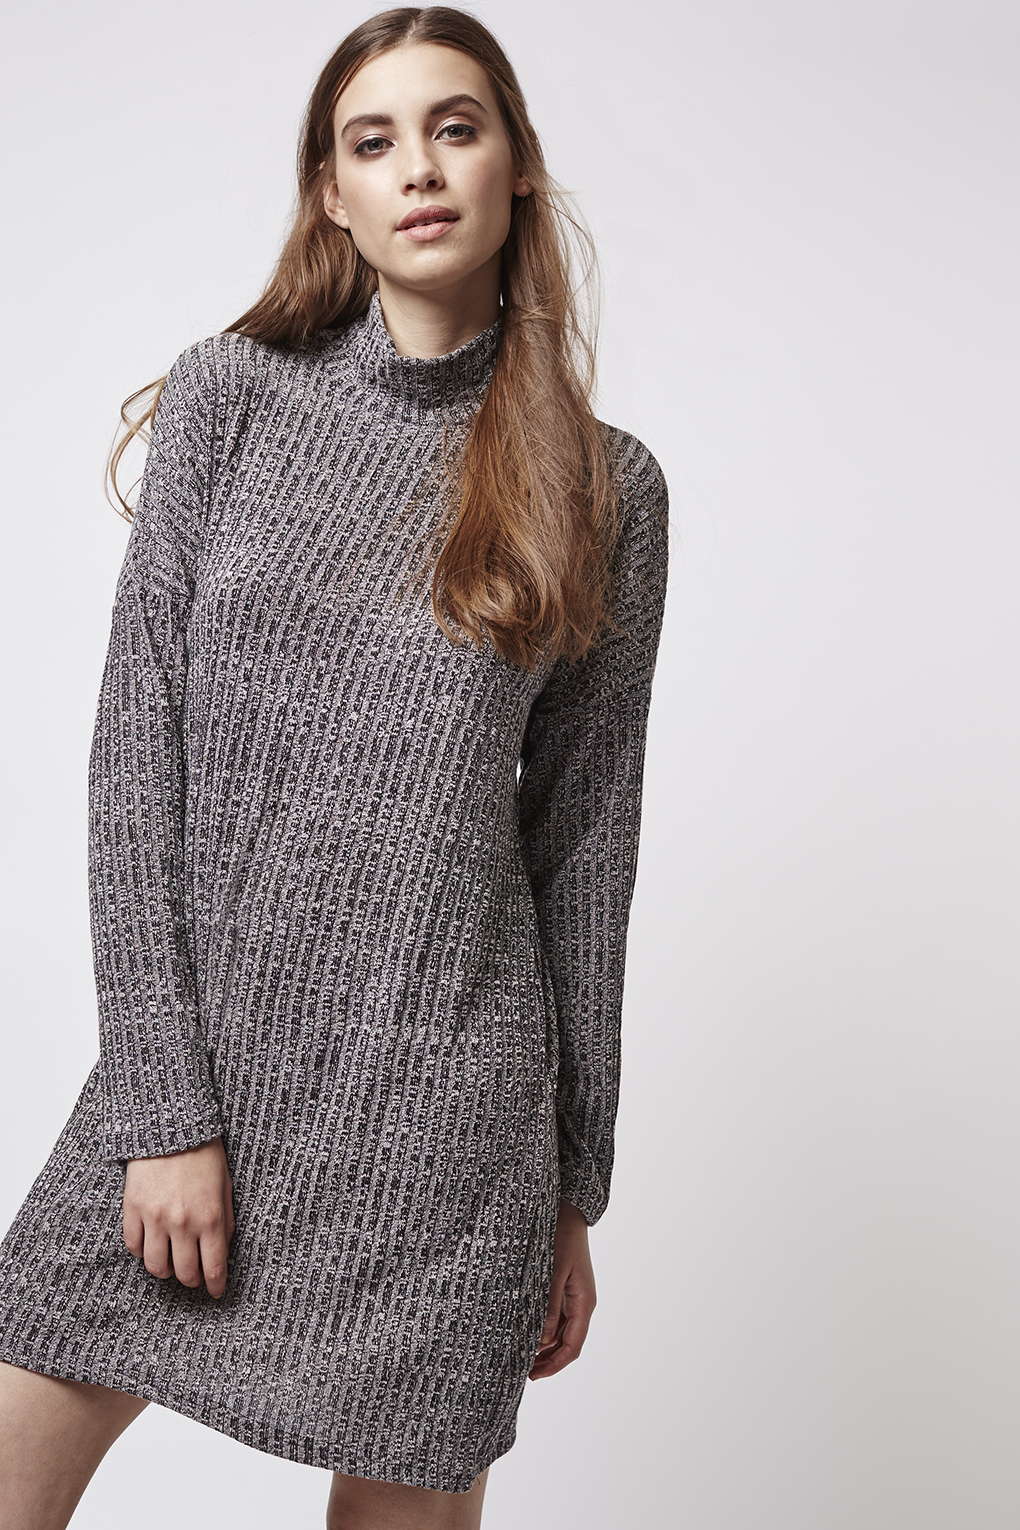 Trend: How To Wear Turtlenecks In The Cold Season